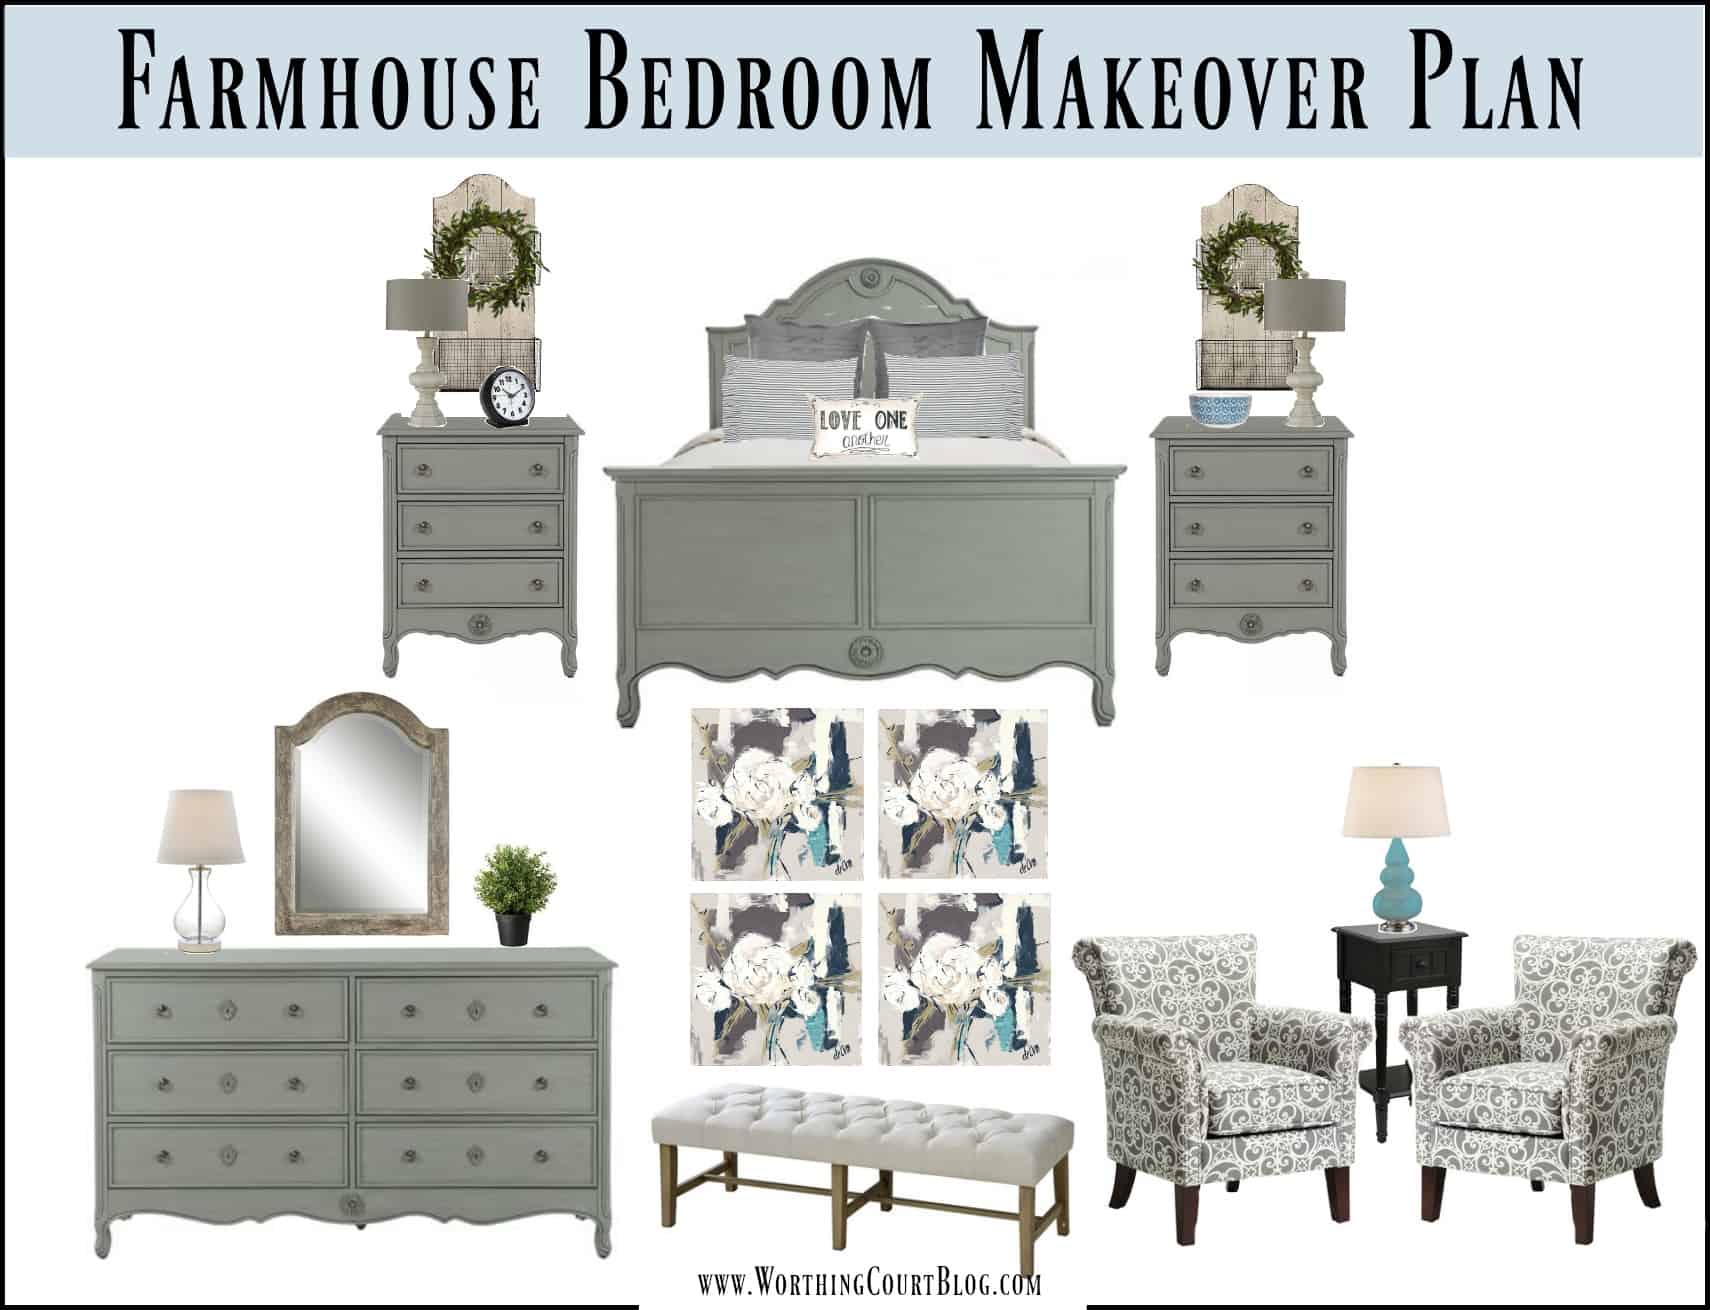 A mood board for farmhouse style bedroom makeover plans || Worthing Court